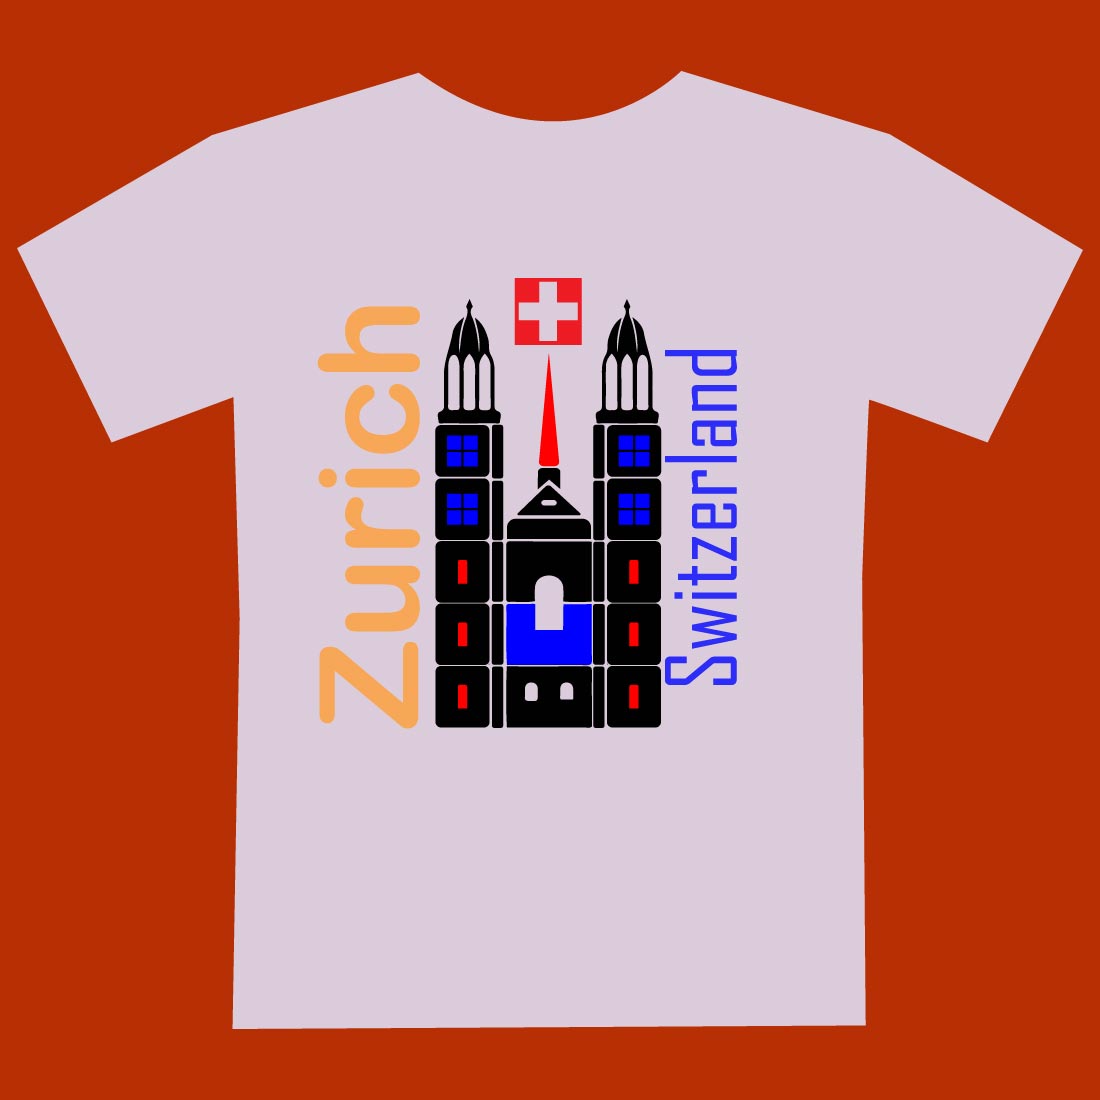 For a festival in Zurich, Switzerland, you might want your T-shirt design to capture the essence of the city and the event preview image.